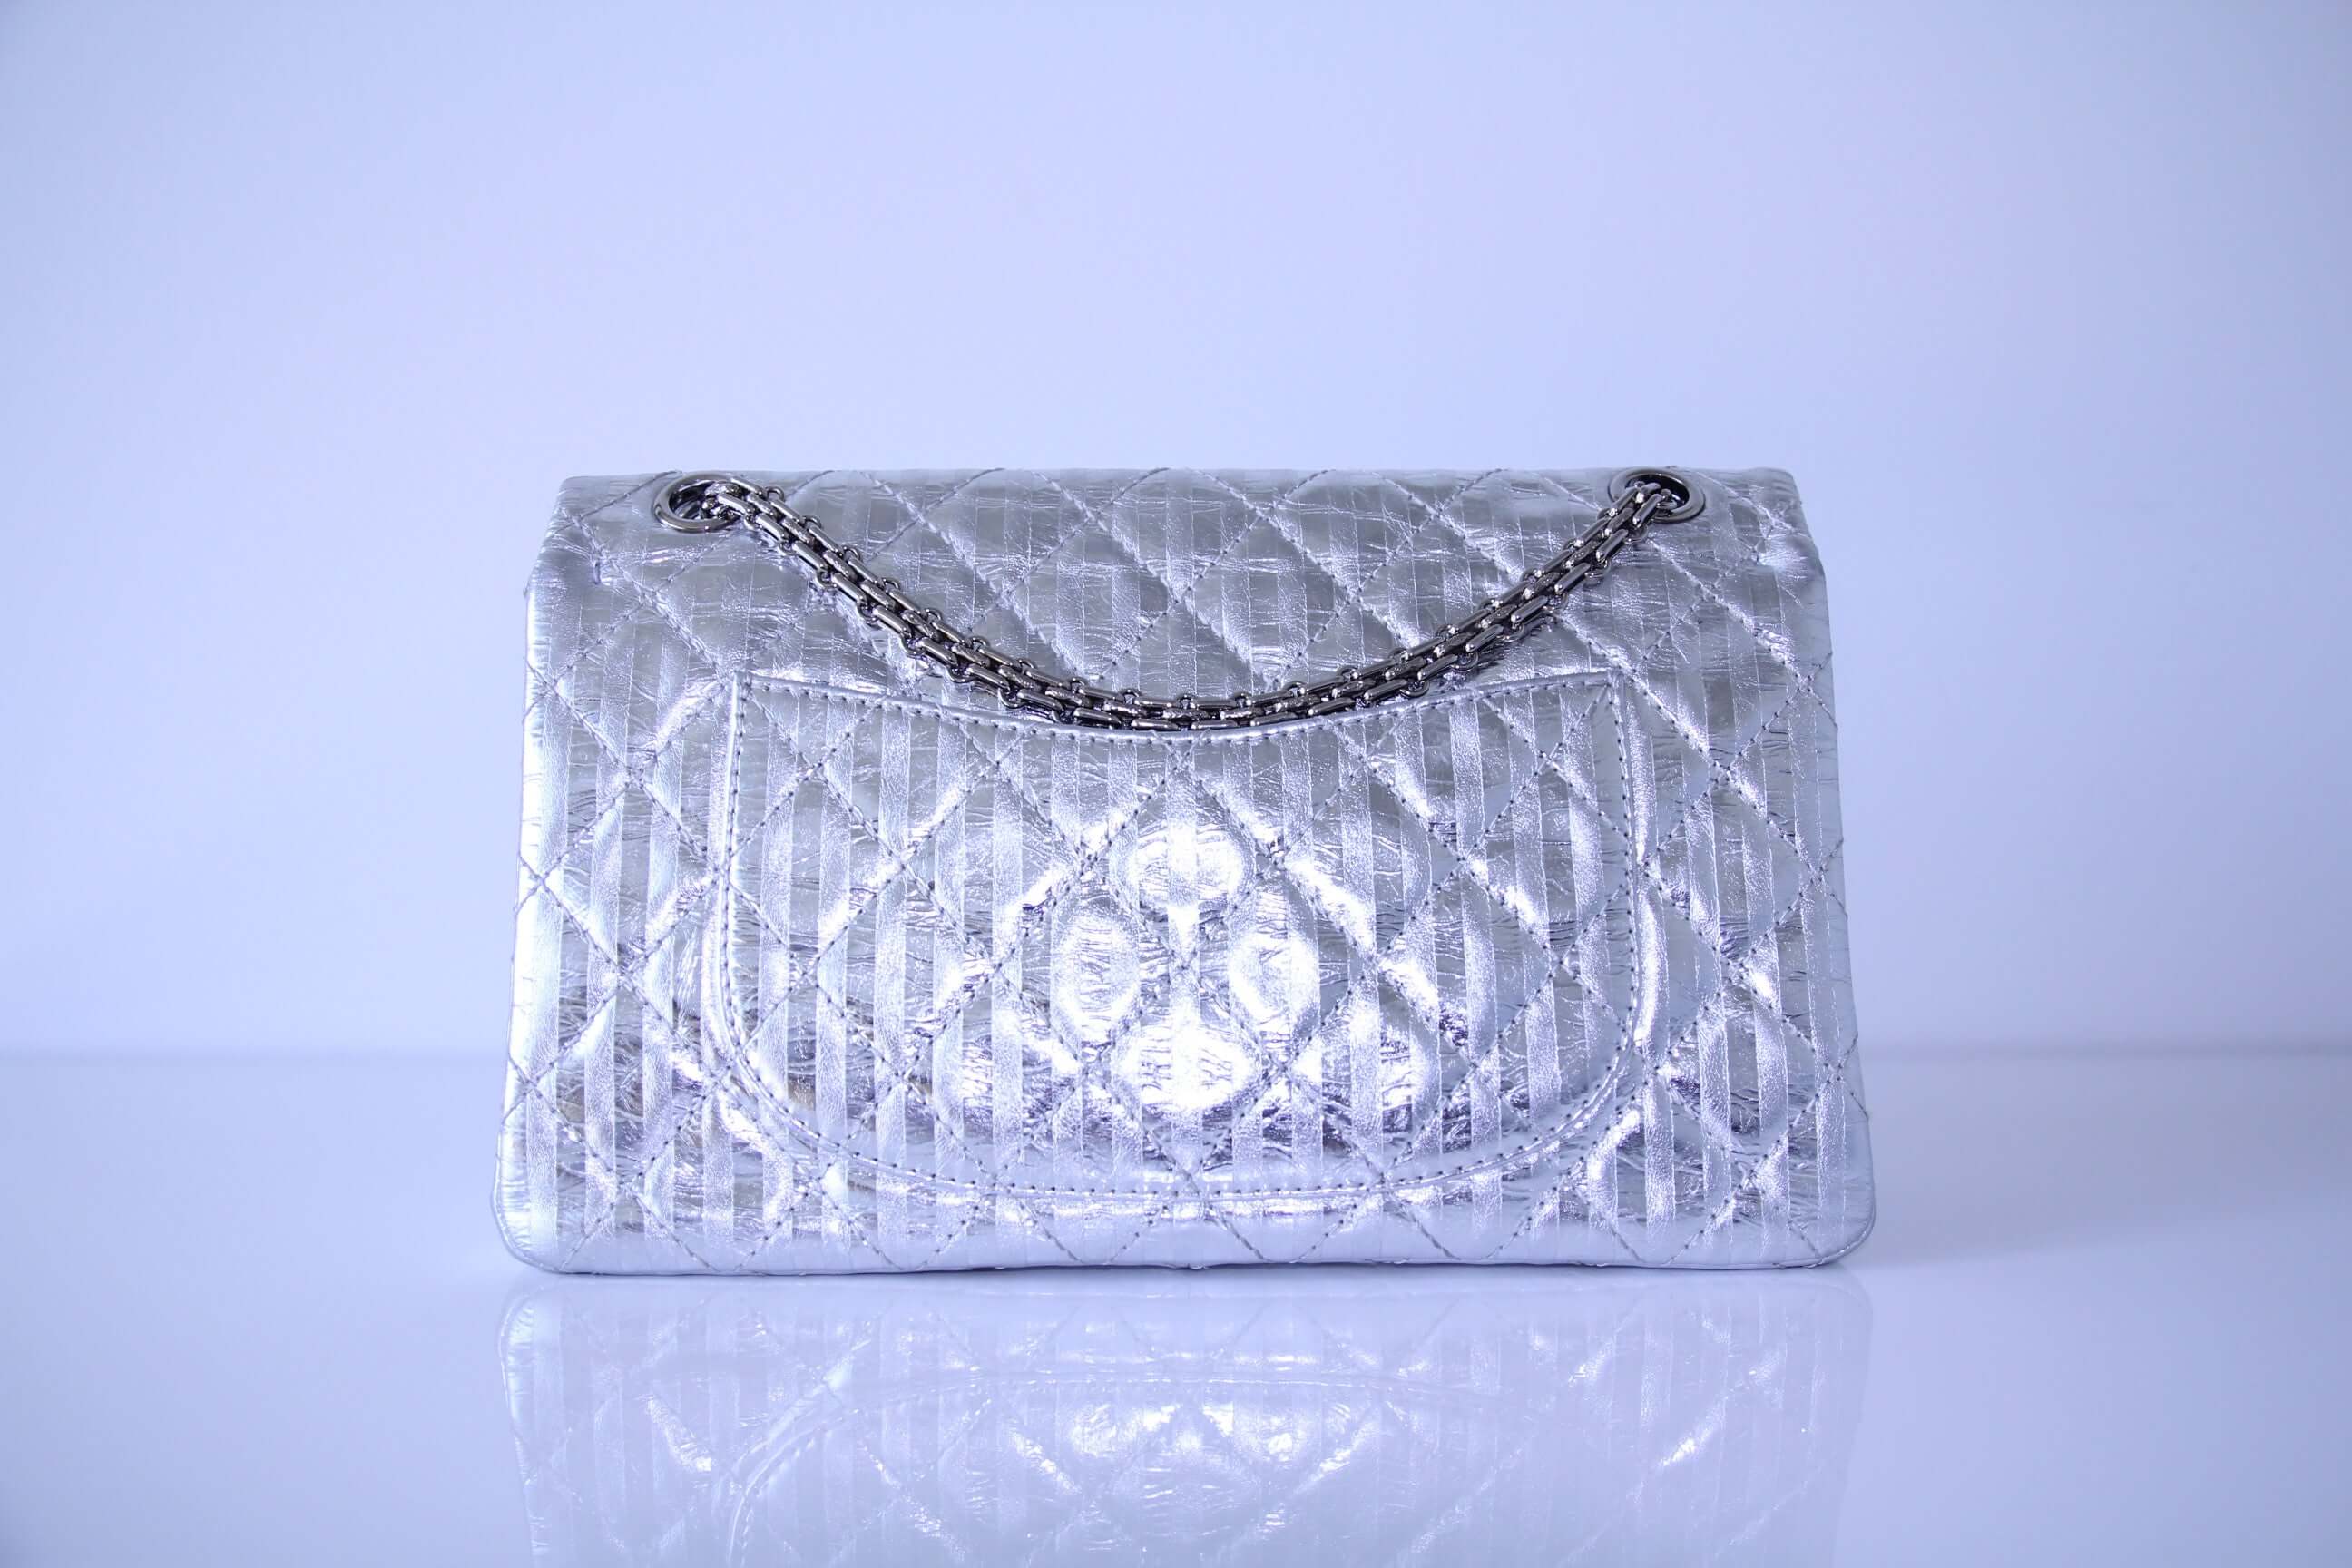 Chanel Bronze Quilted Distressed Metallic Calfskin Reissue 227 by Ann's Fabulous Finds